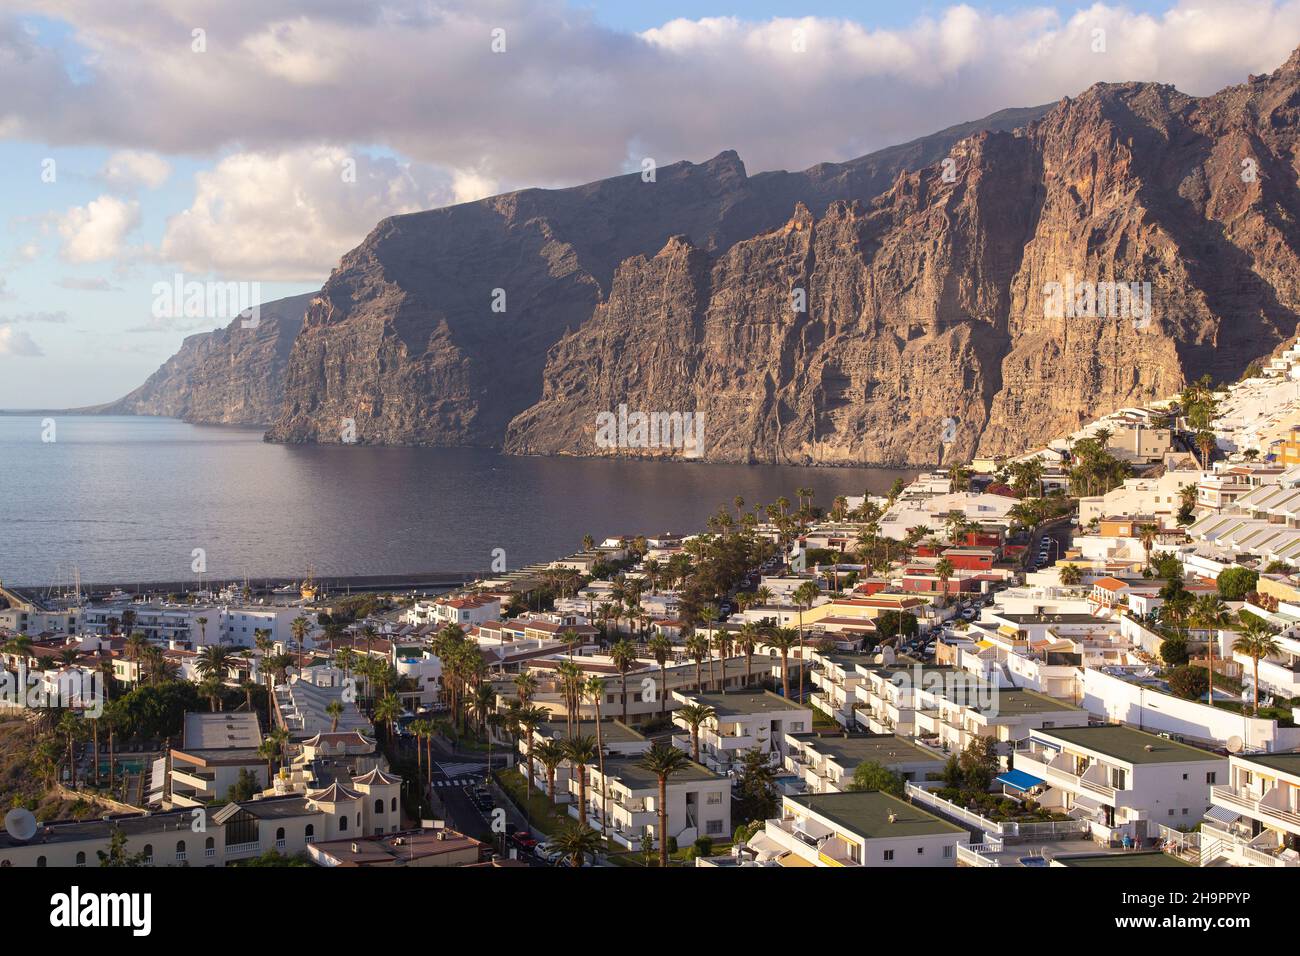 Los Gigantes, The view of famous cliffs, Tenerife, Canary Islands, Spain. Stock Photo